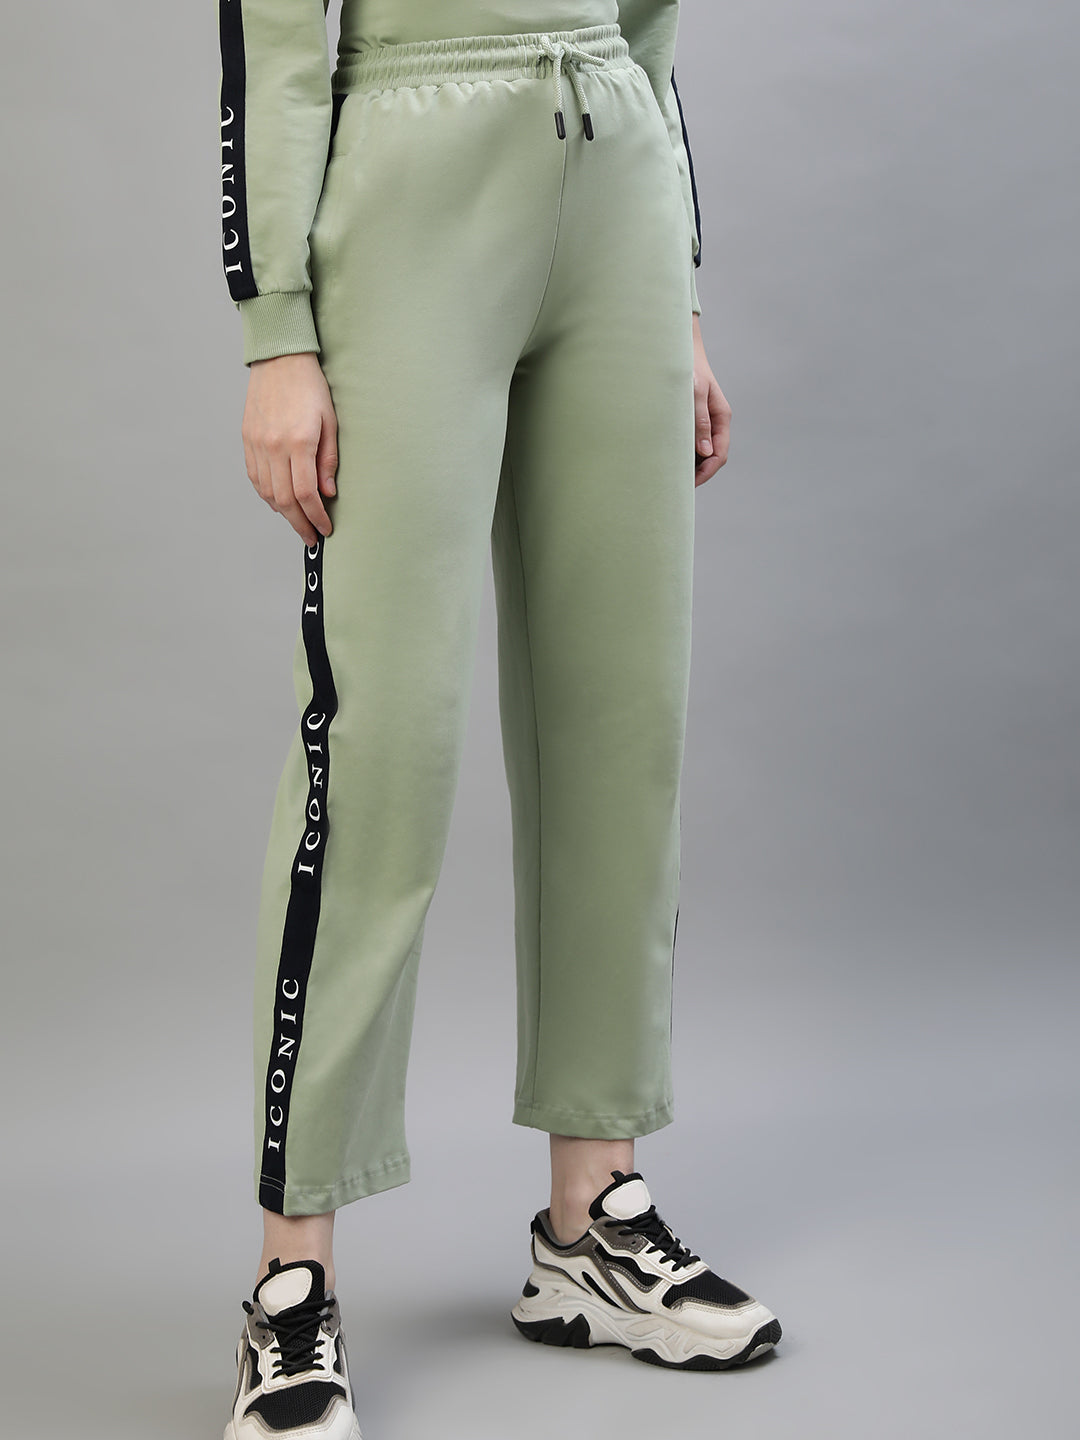 Trending Wholesale girls in sweat pants At Affordable Prices